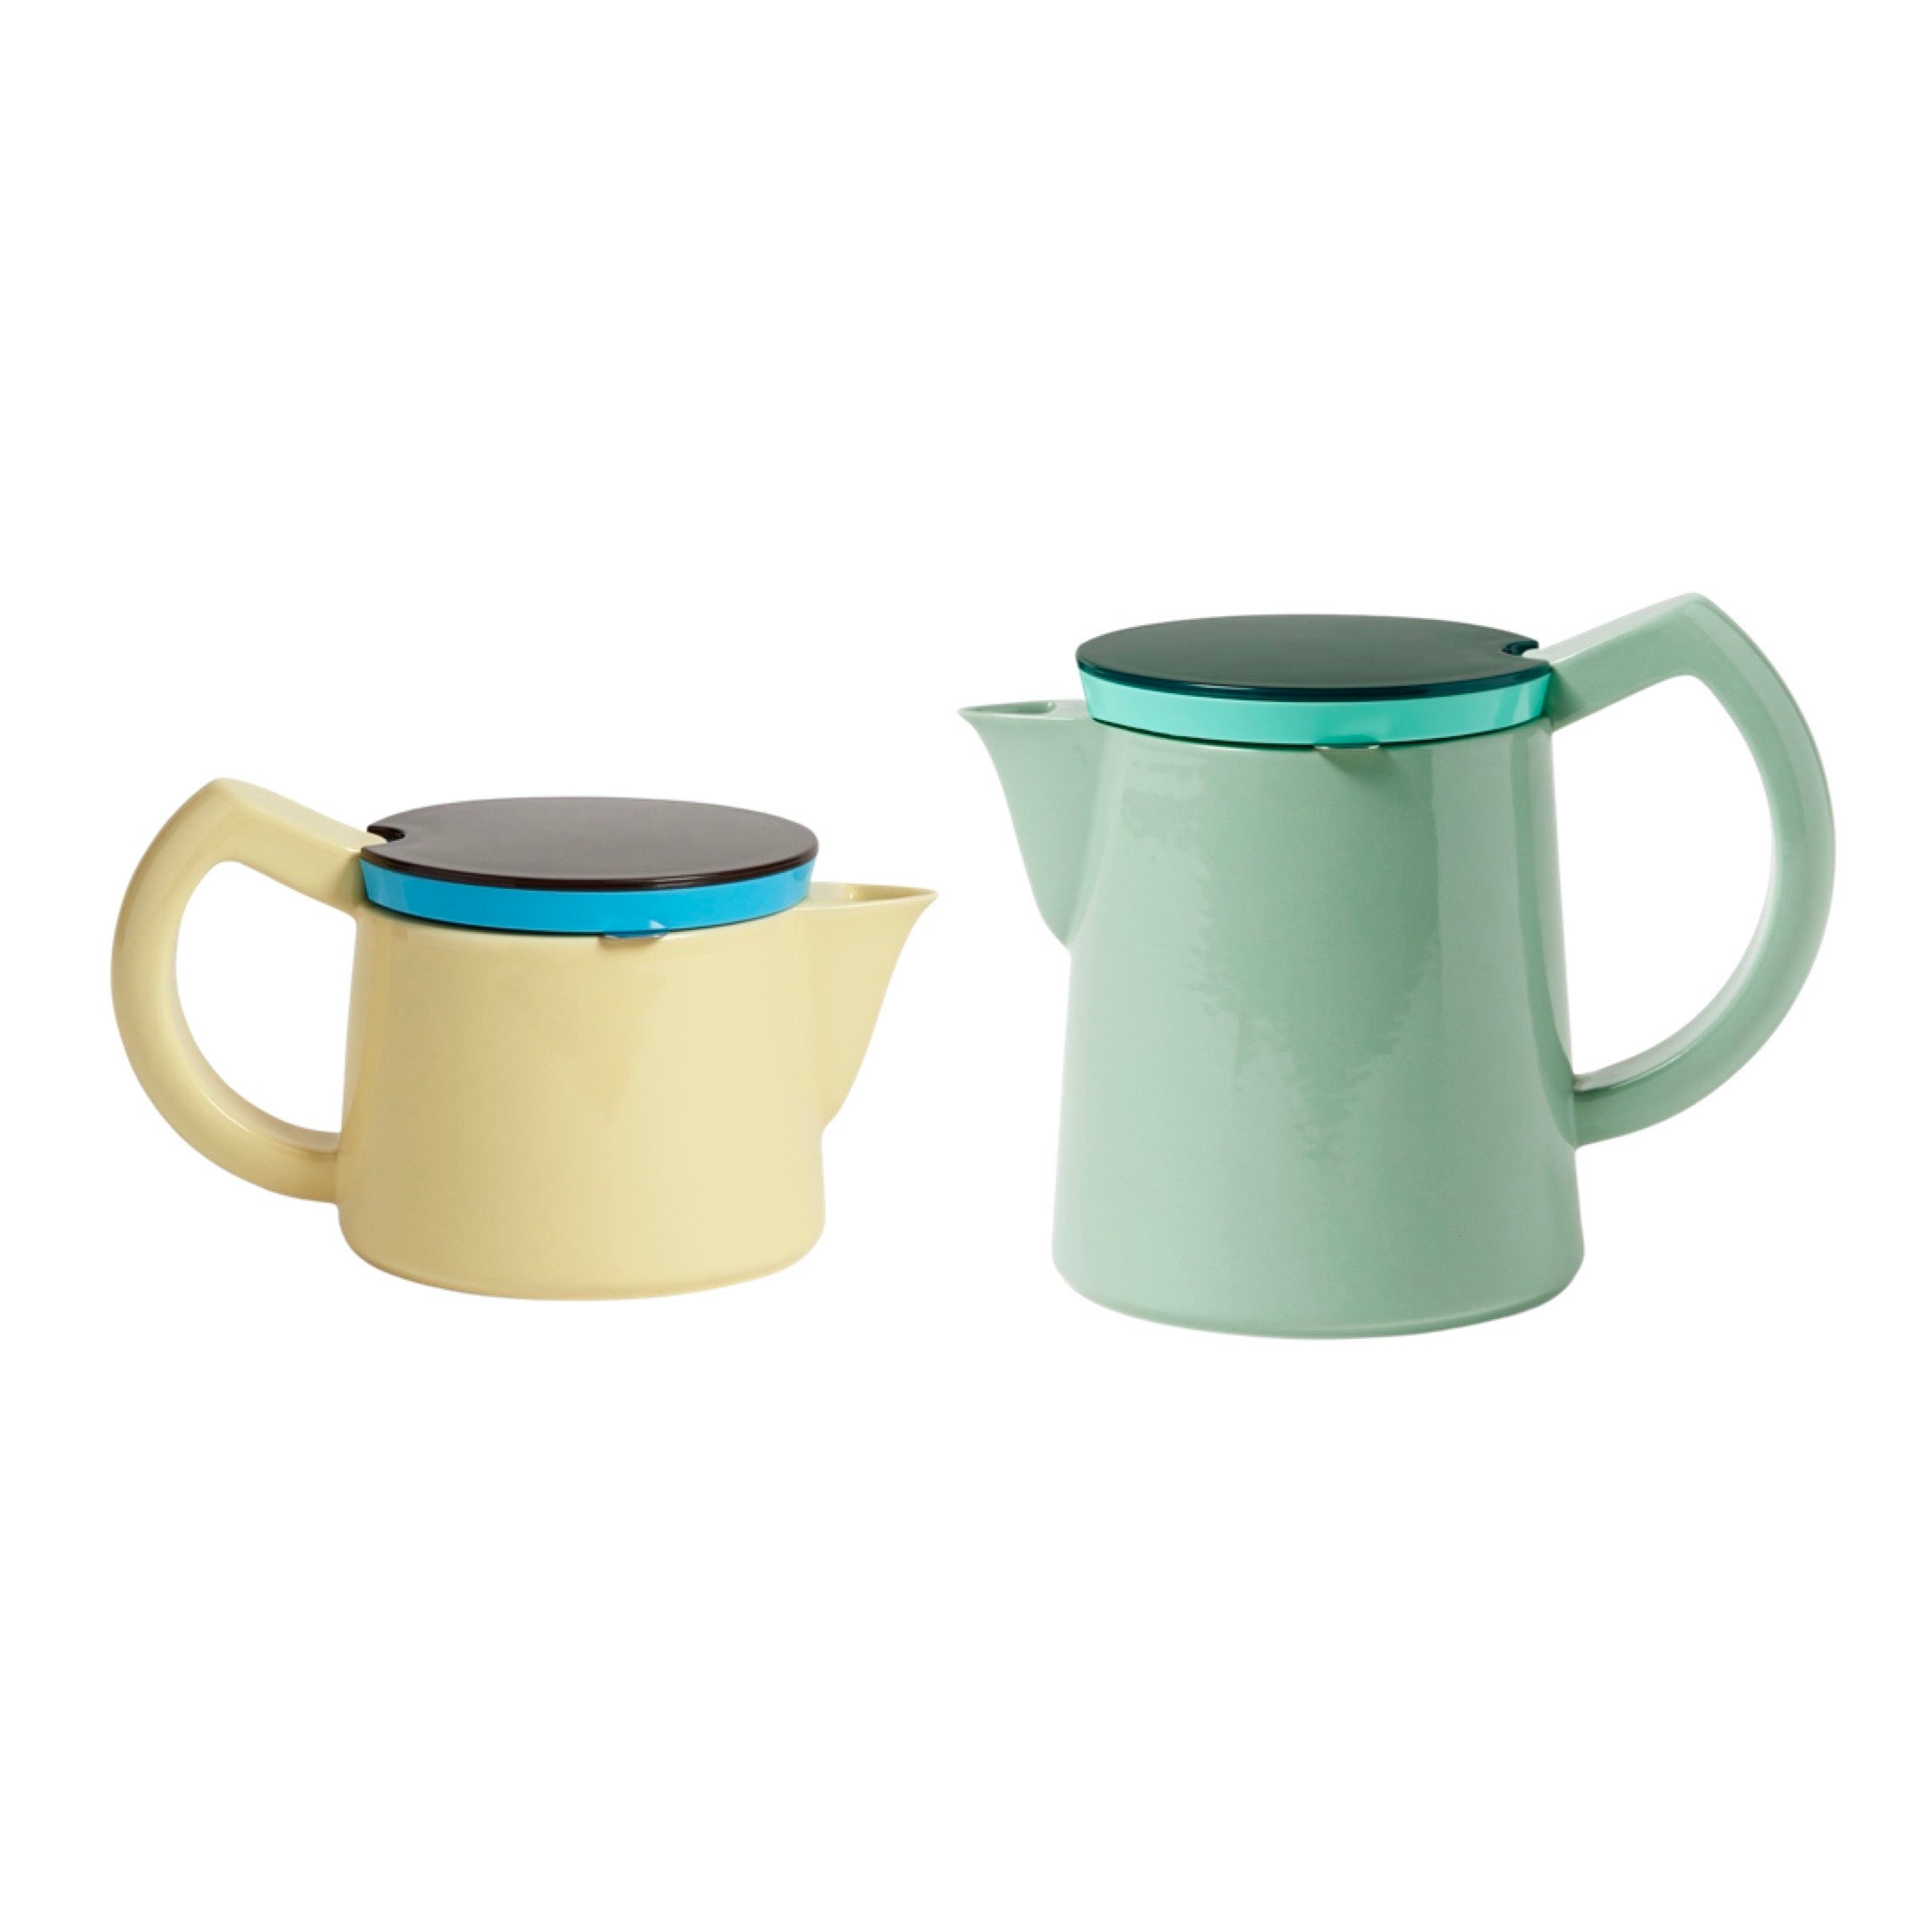 HAY Sowden Coffee Brewer / Pot - Small - Light Yellow